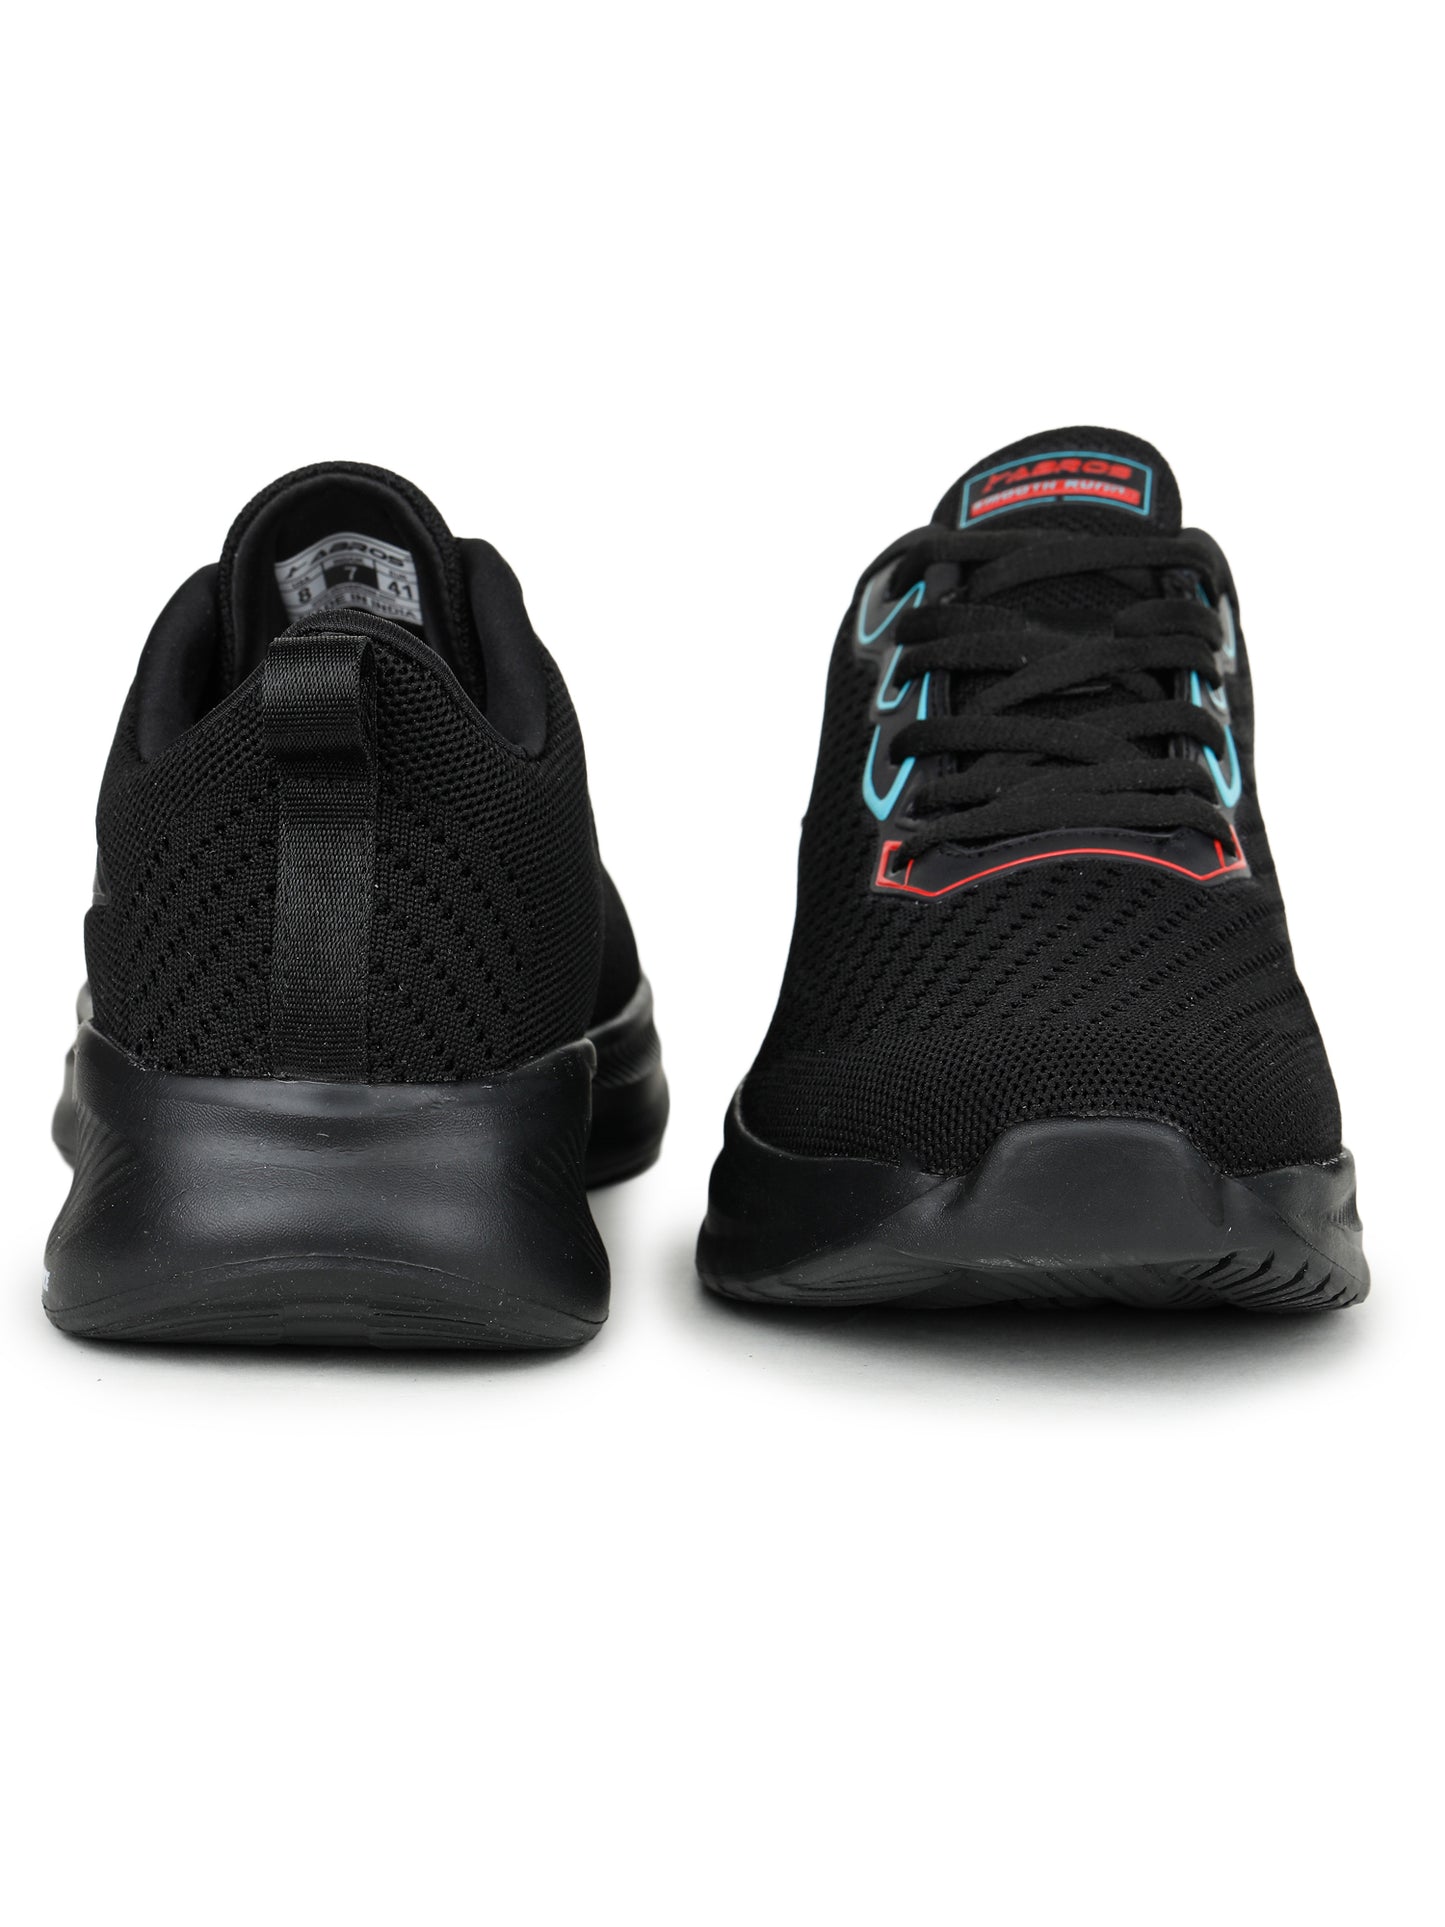 ABROS Inter Ceptor-3 Sports Shoes For Men